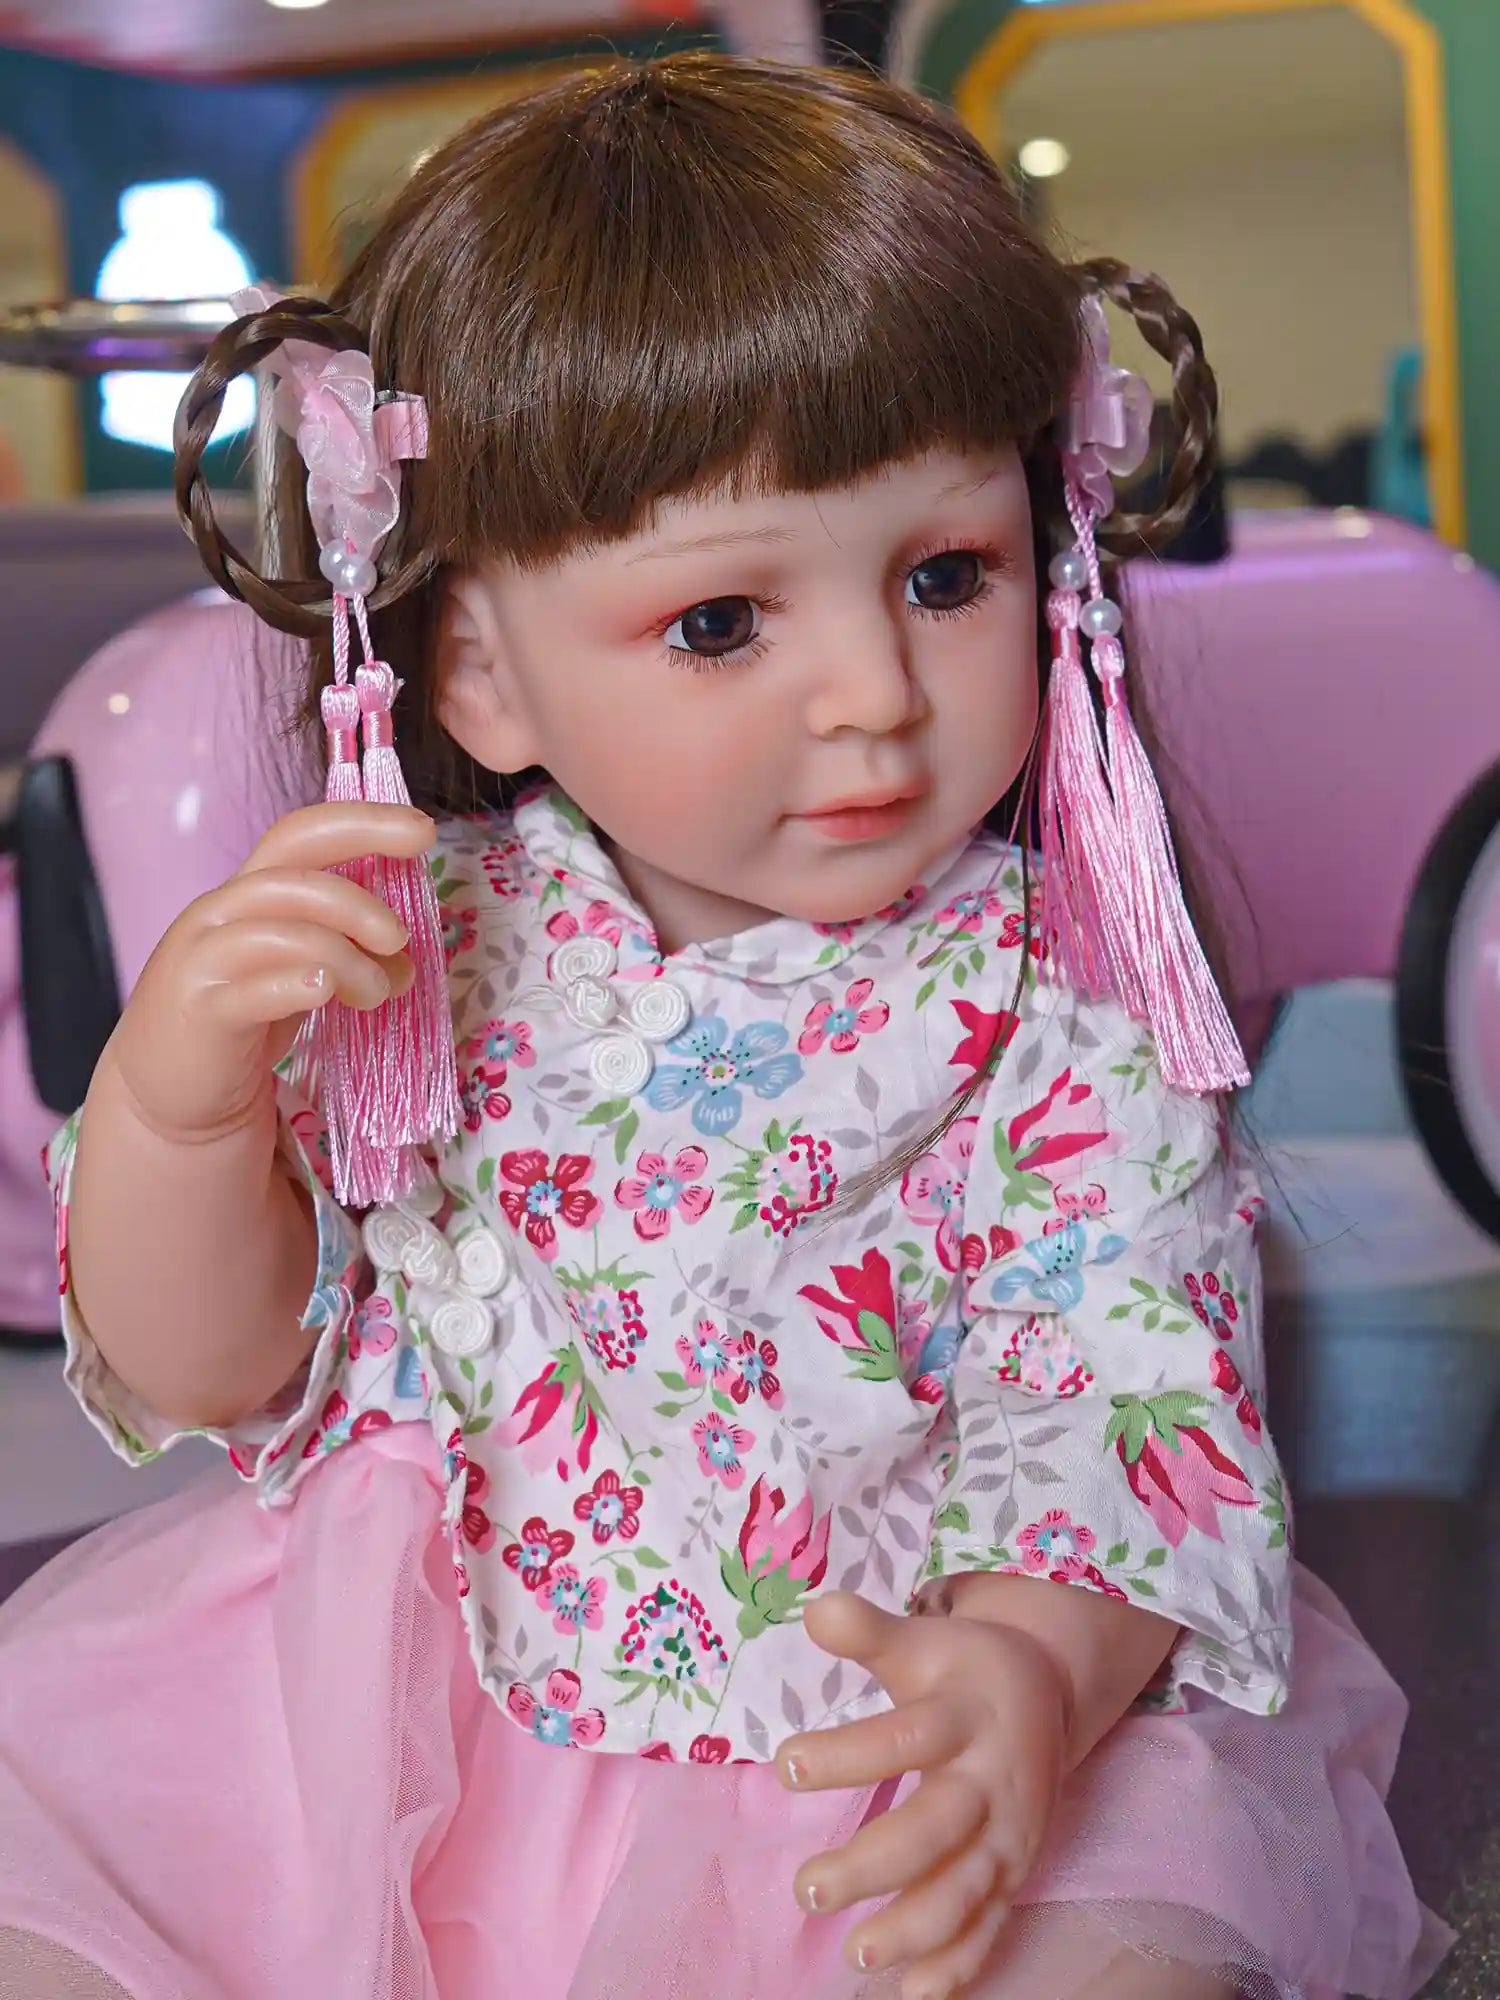 Toddler doll seated with legs crossed, dressed in a pink and white floral kimono dress with pink tulle skirt, white shoes, and pink ribbon hair accessories.